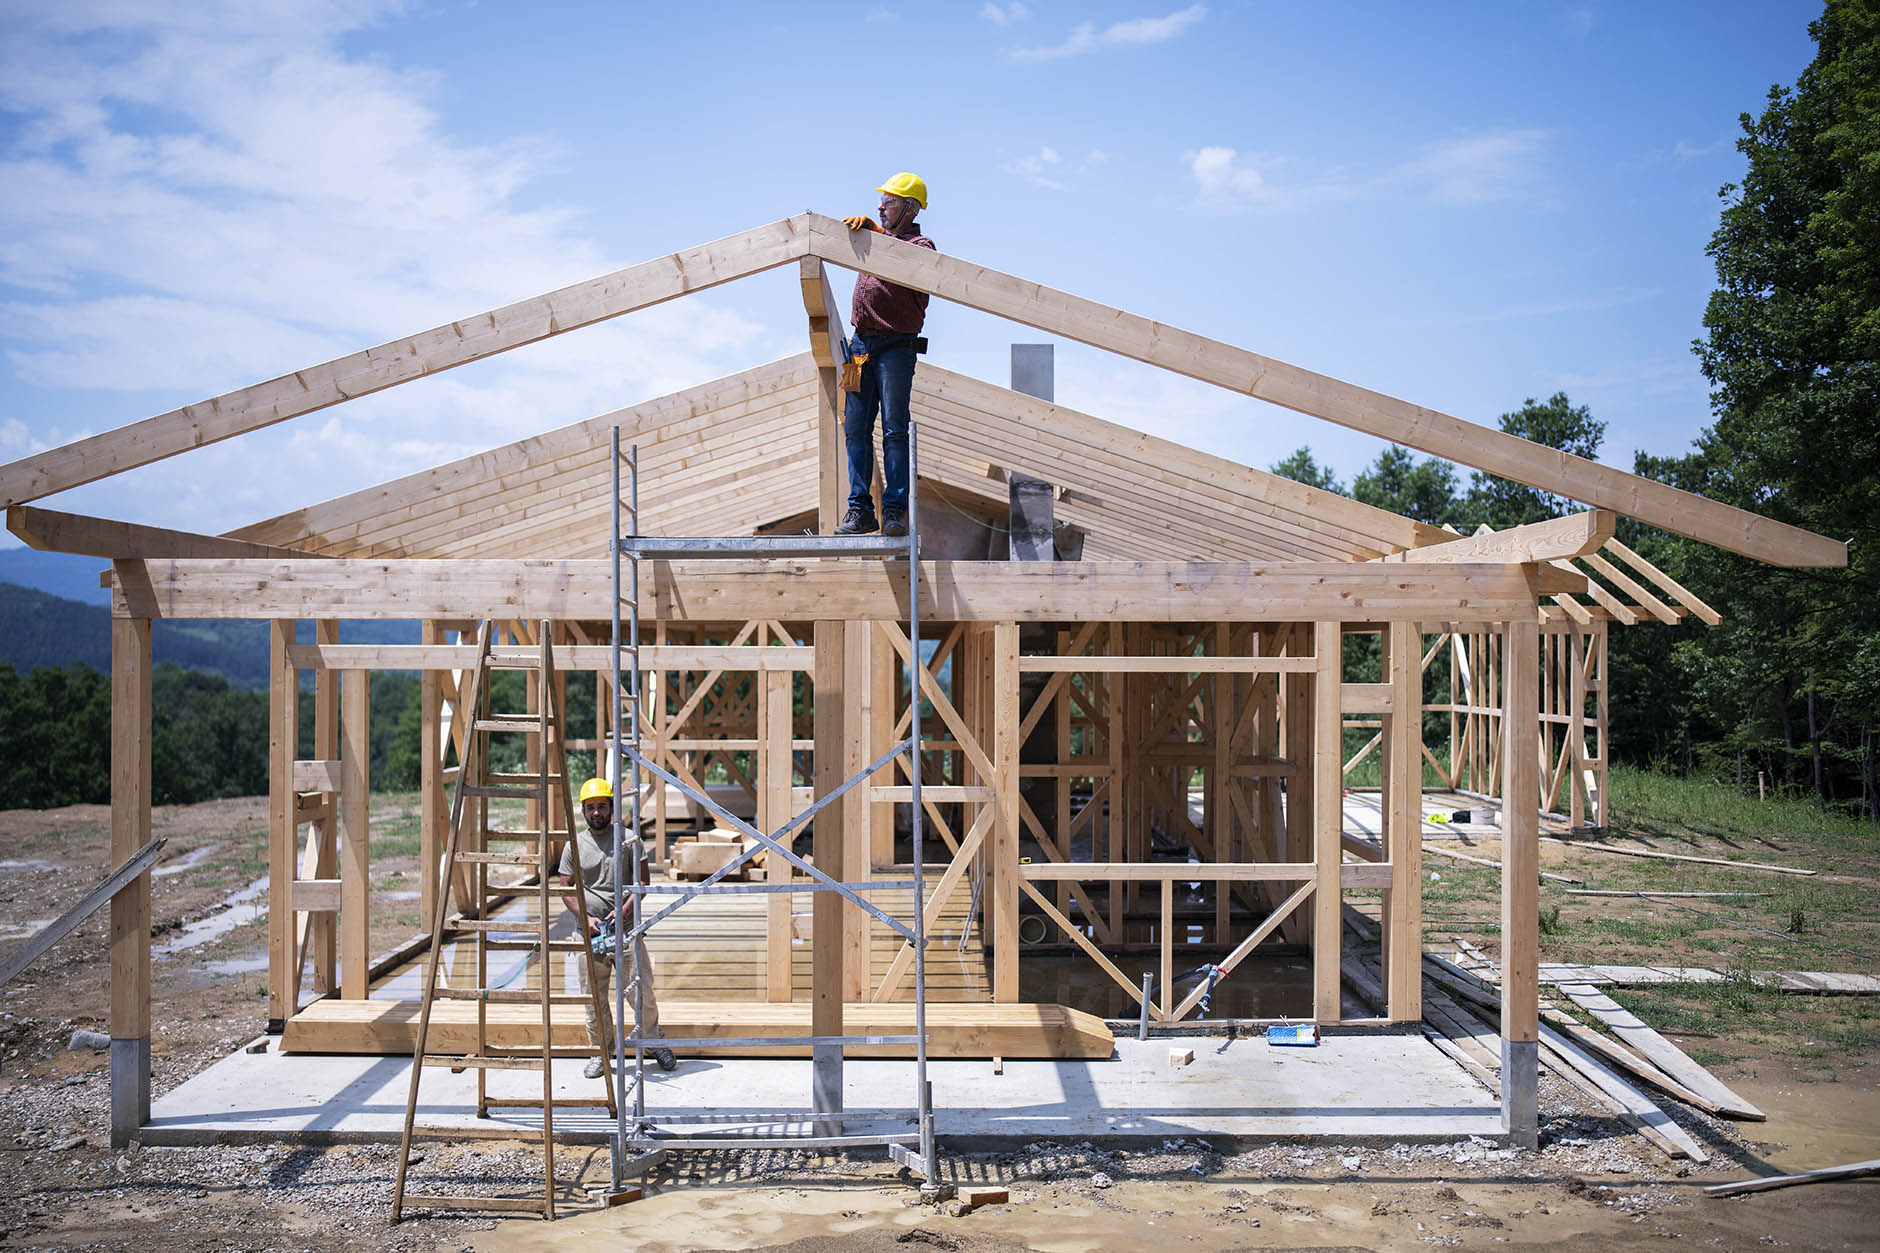 Construction costs continue to rise, but peak growth may be nearing